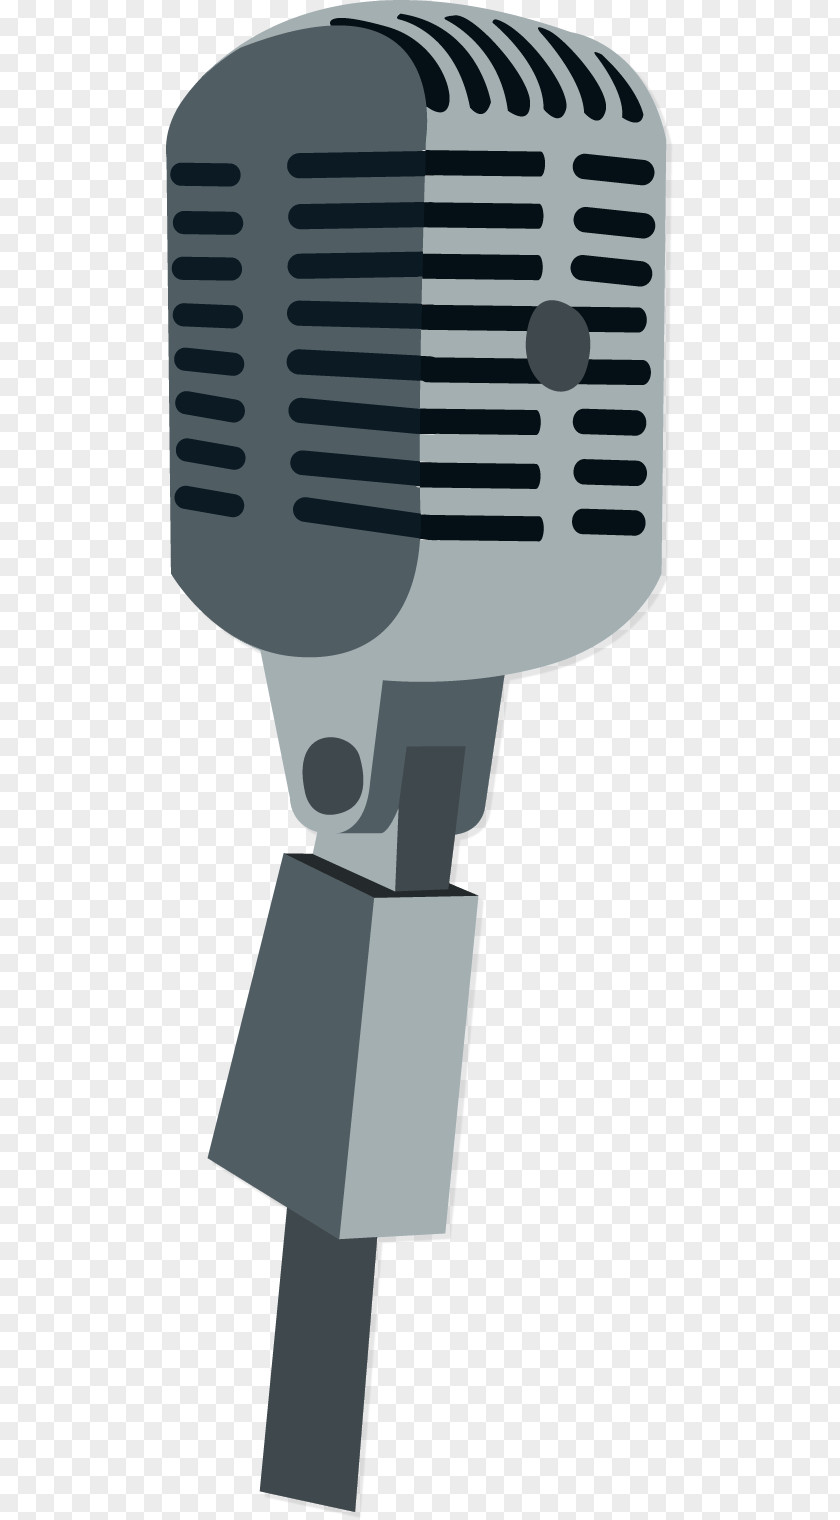 Old Microphone Cartoon Icon PNG